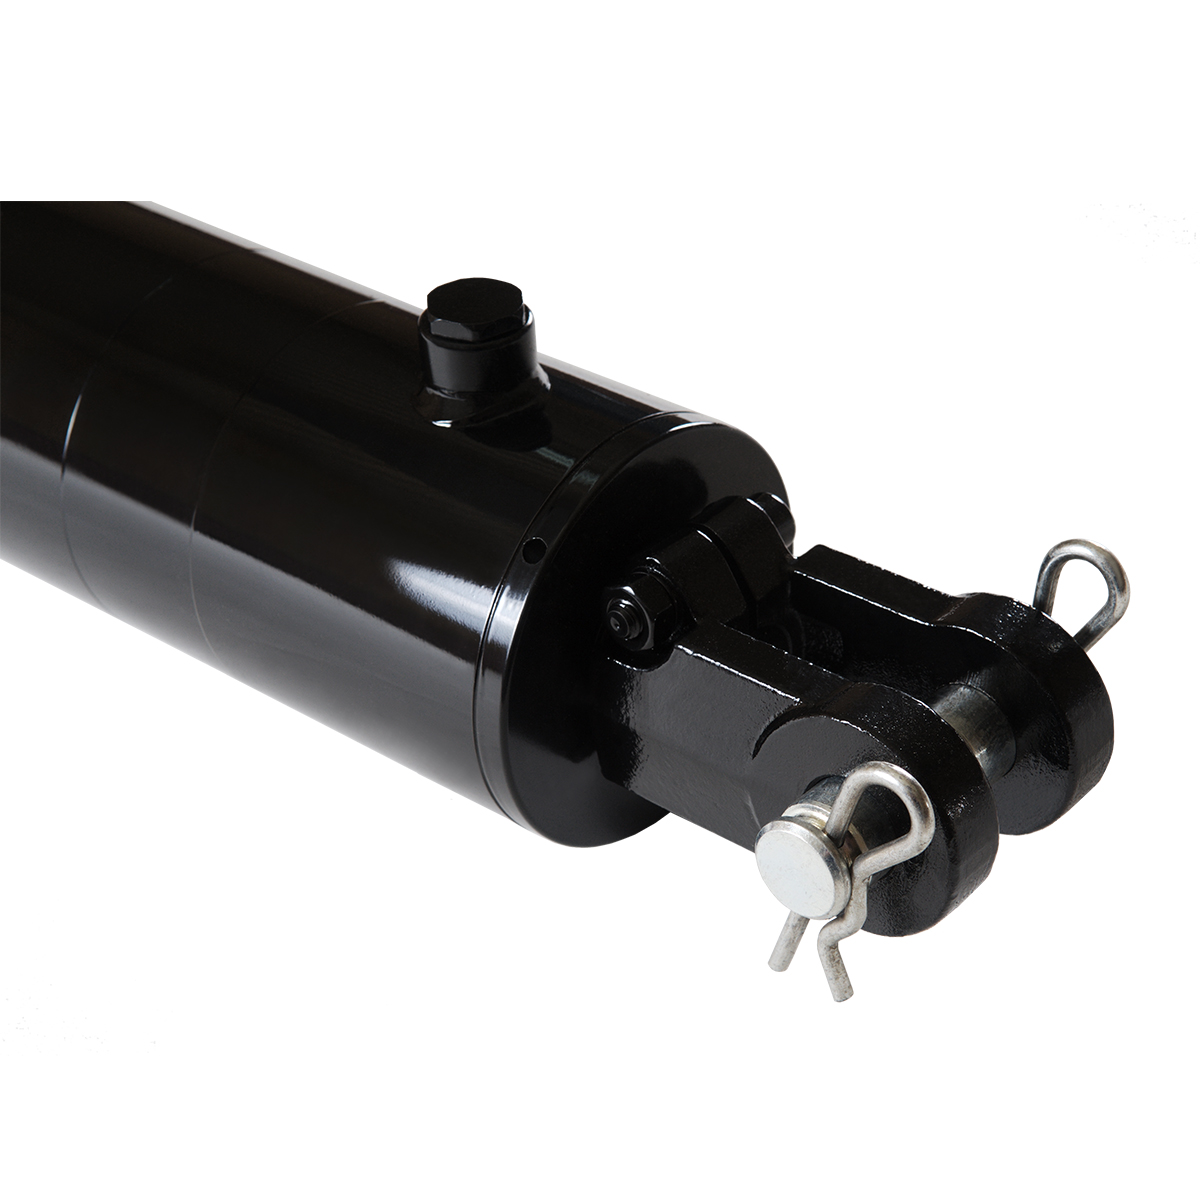 4 bore x 30 stroke hydraulic cylinder, welded clevis double acting cylinder | Magister Hydraulics